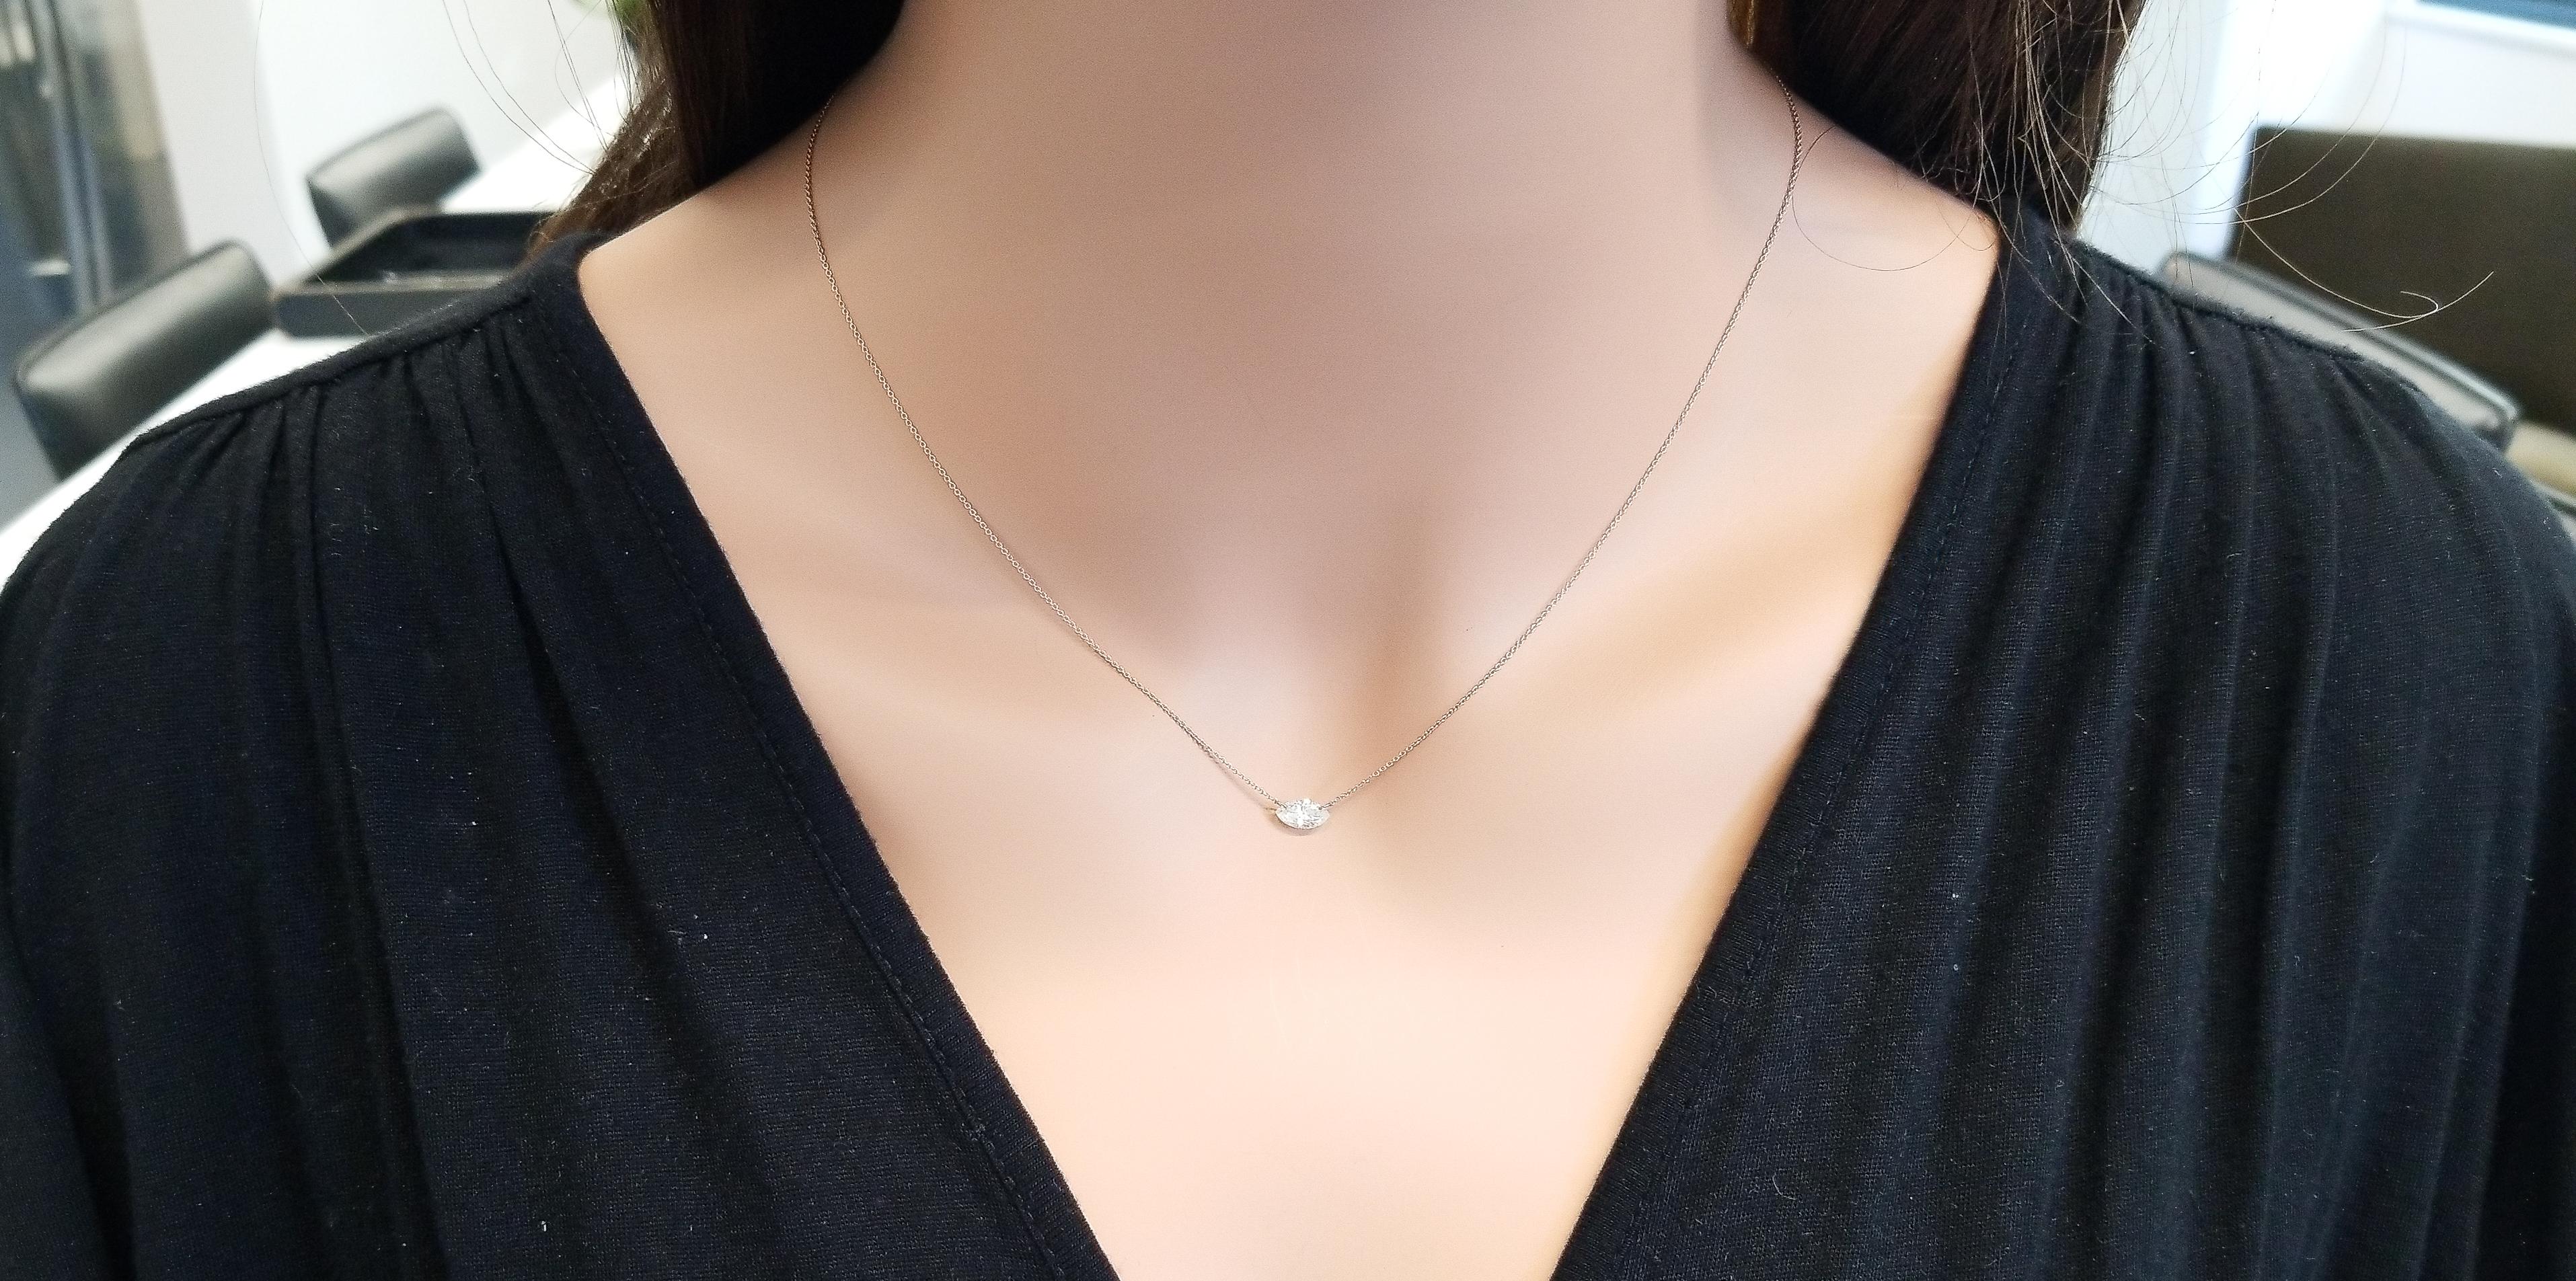 This gorgeous 14 karat rose gold diamond solitaire necklace is perfect for an anniversary or birthday present, truly unique in its remarkable presentation. A stunning 0.50-carat marquise diamond is drill set sideways on a shiny chain and has a